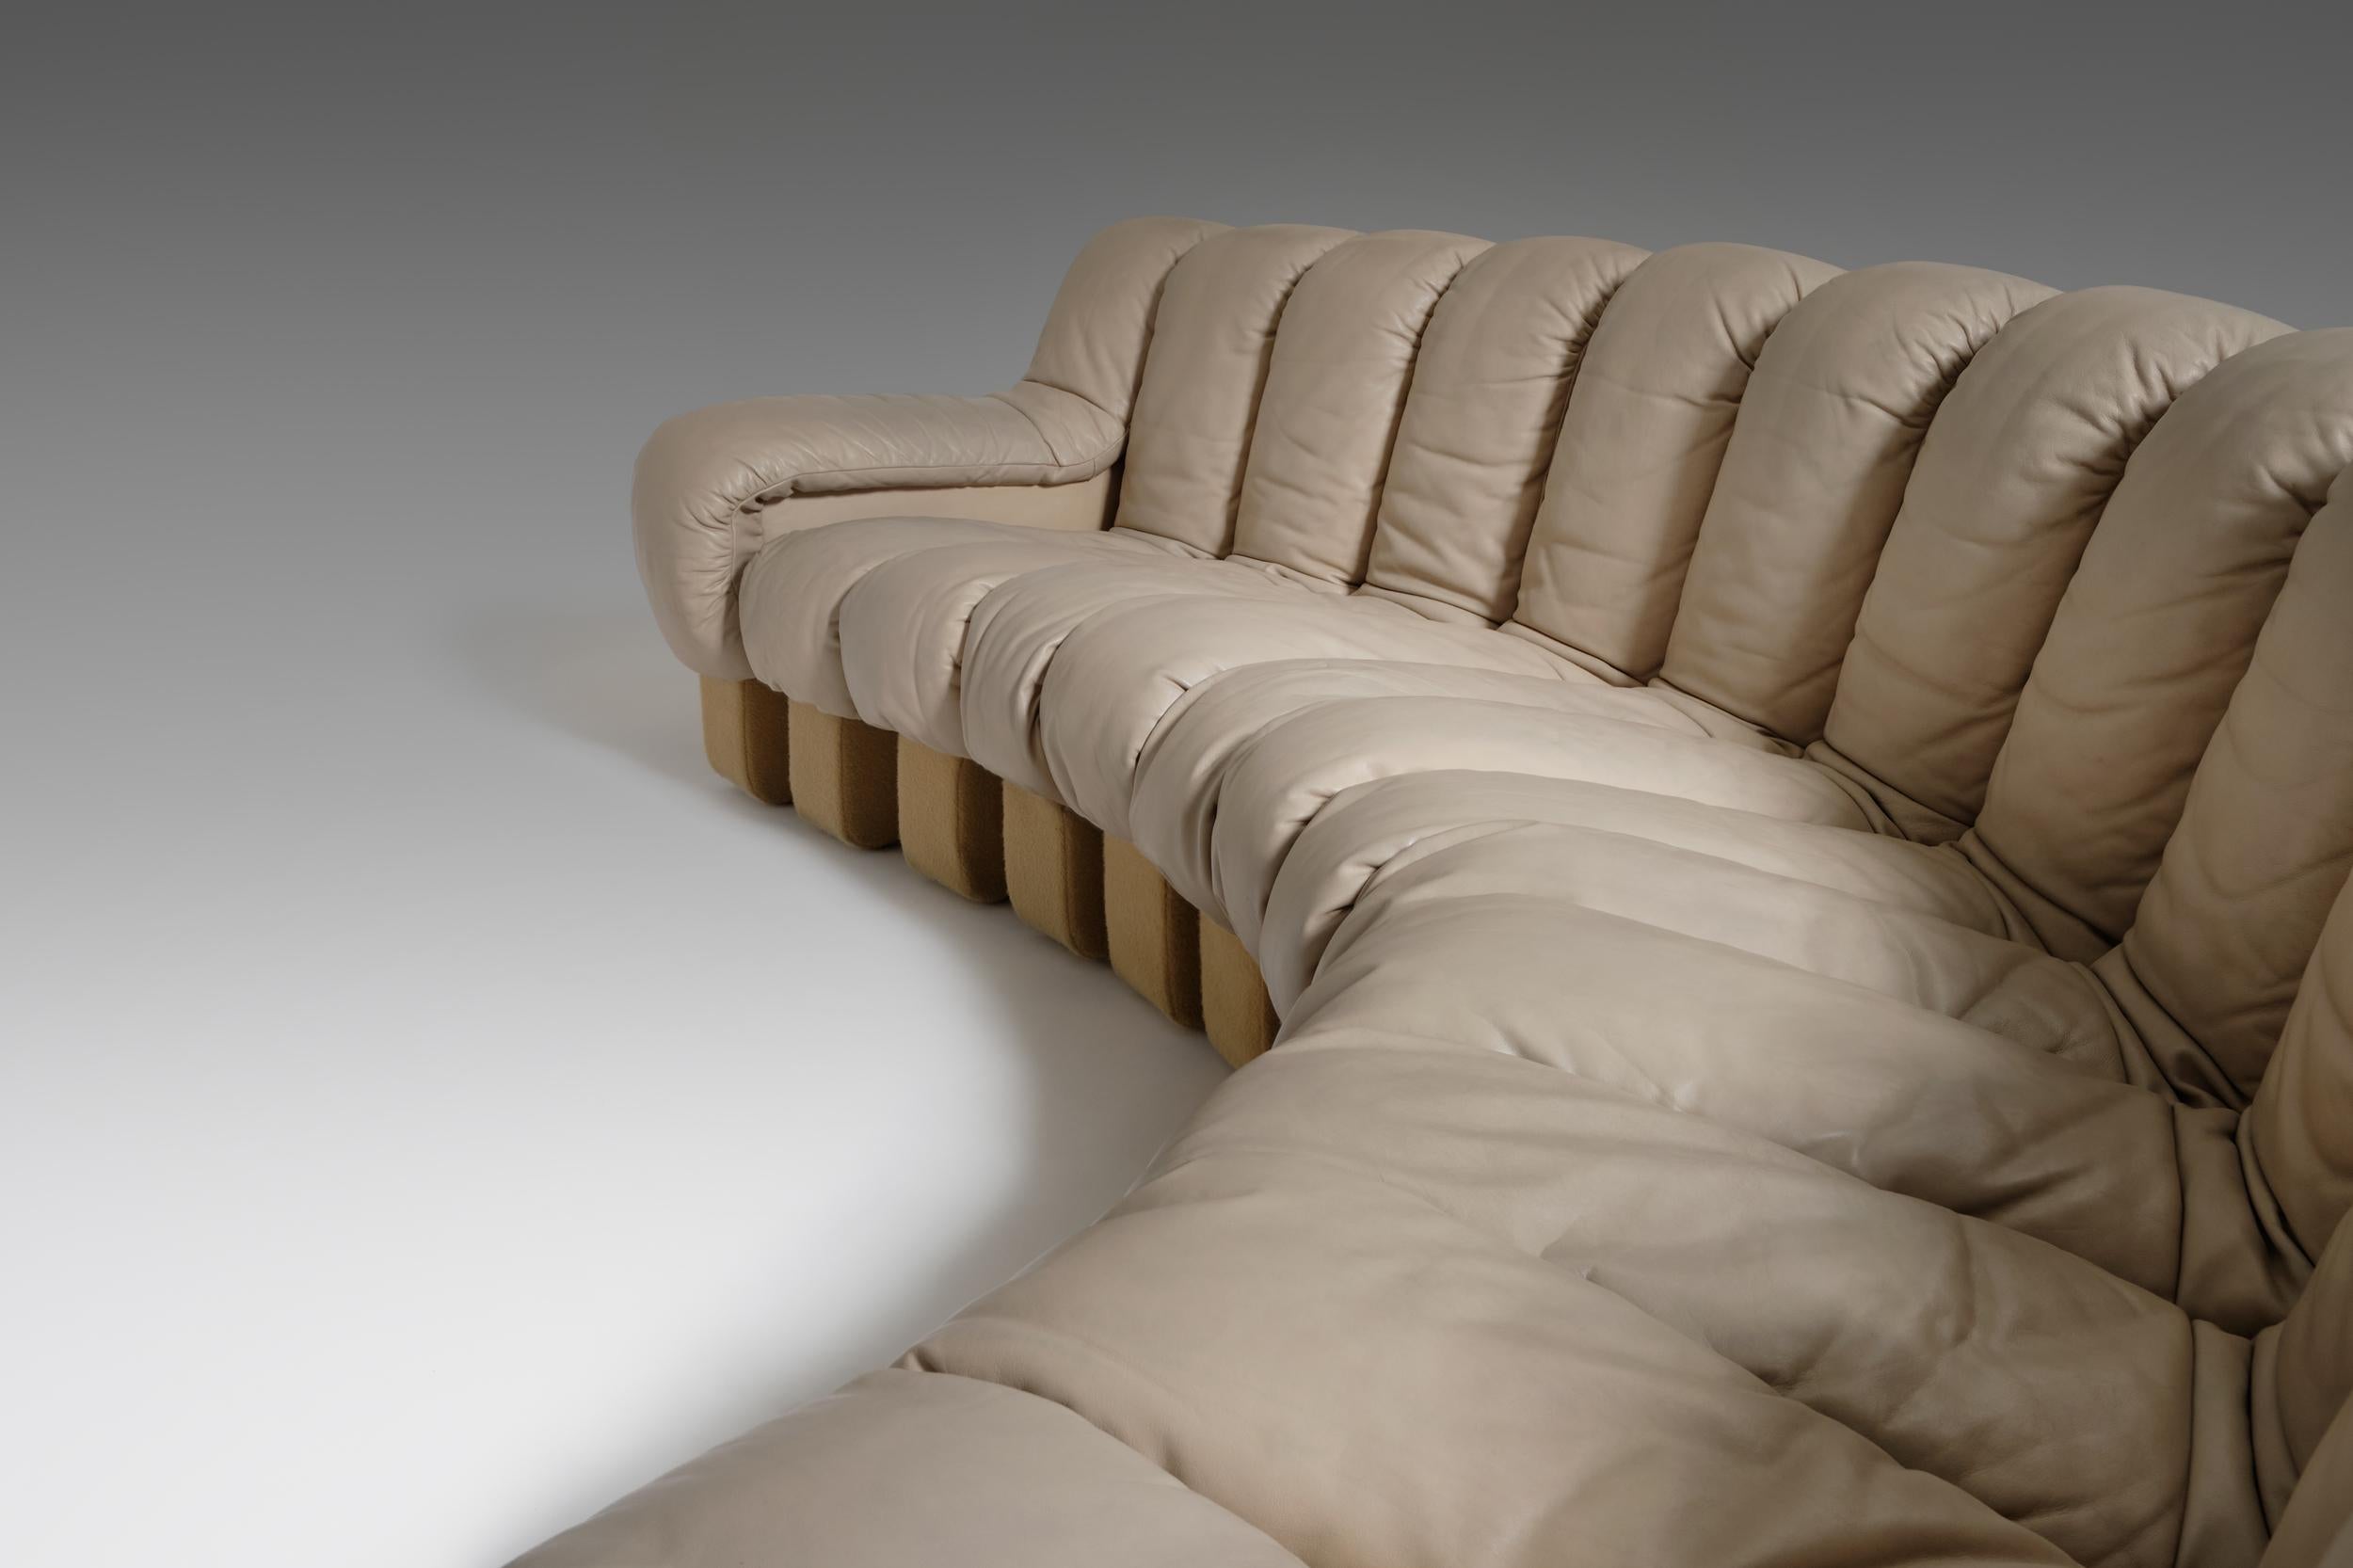 Swiss De Sede DS 600 ‘Non Stop’ Sectional Sofa in Beige Leather